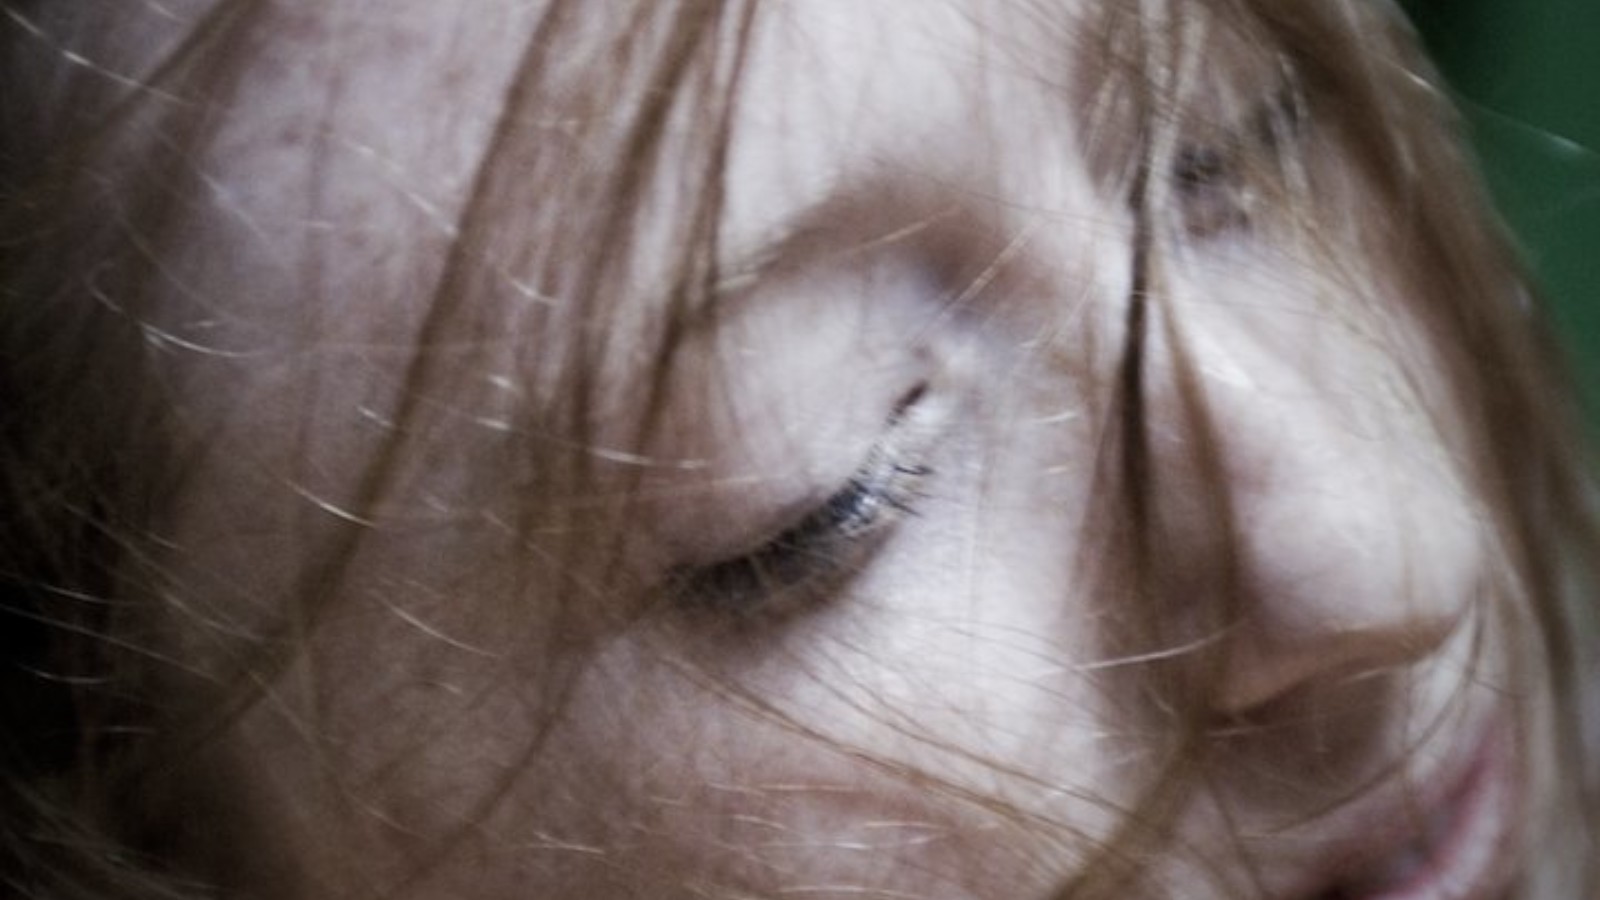 A close up image of a women's face with her hair faintly covering her face.